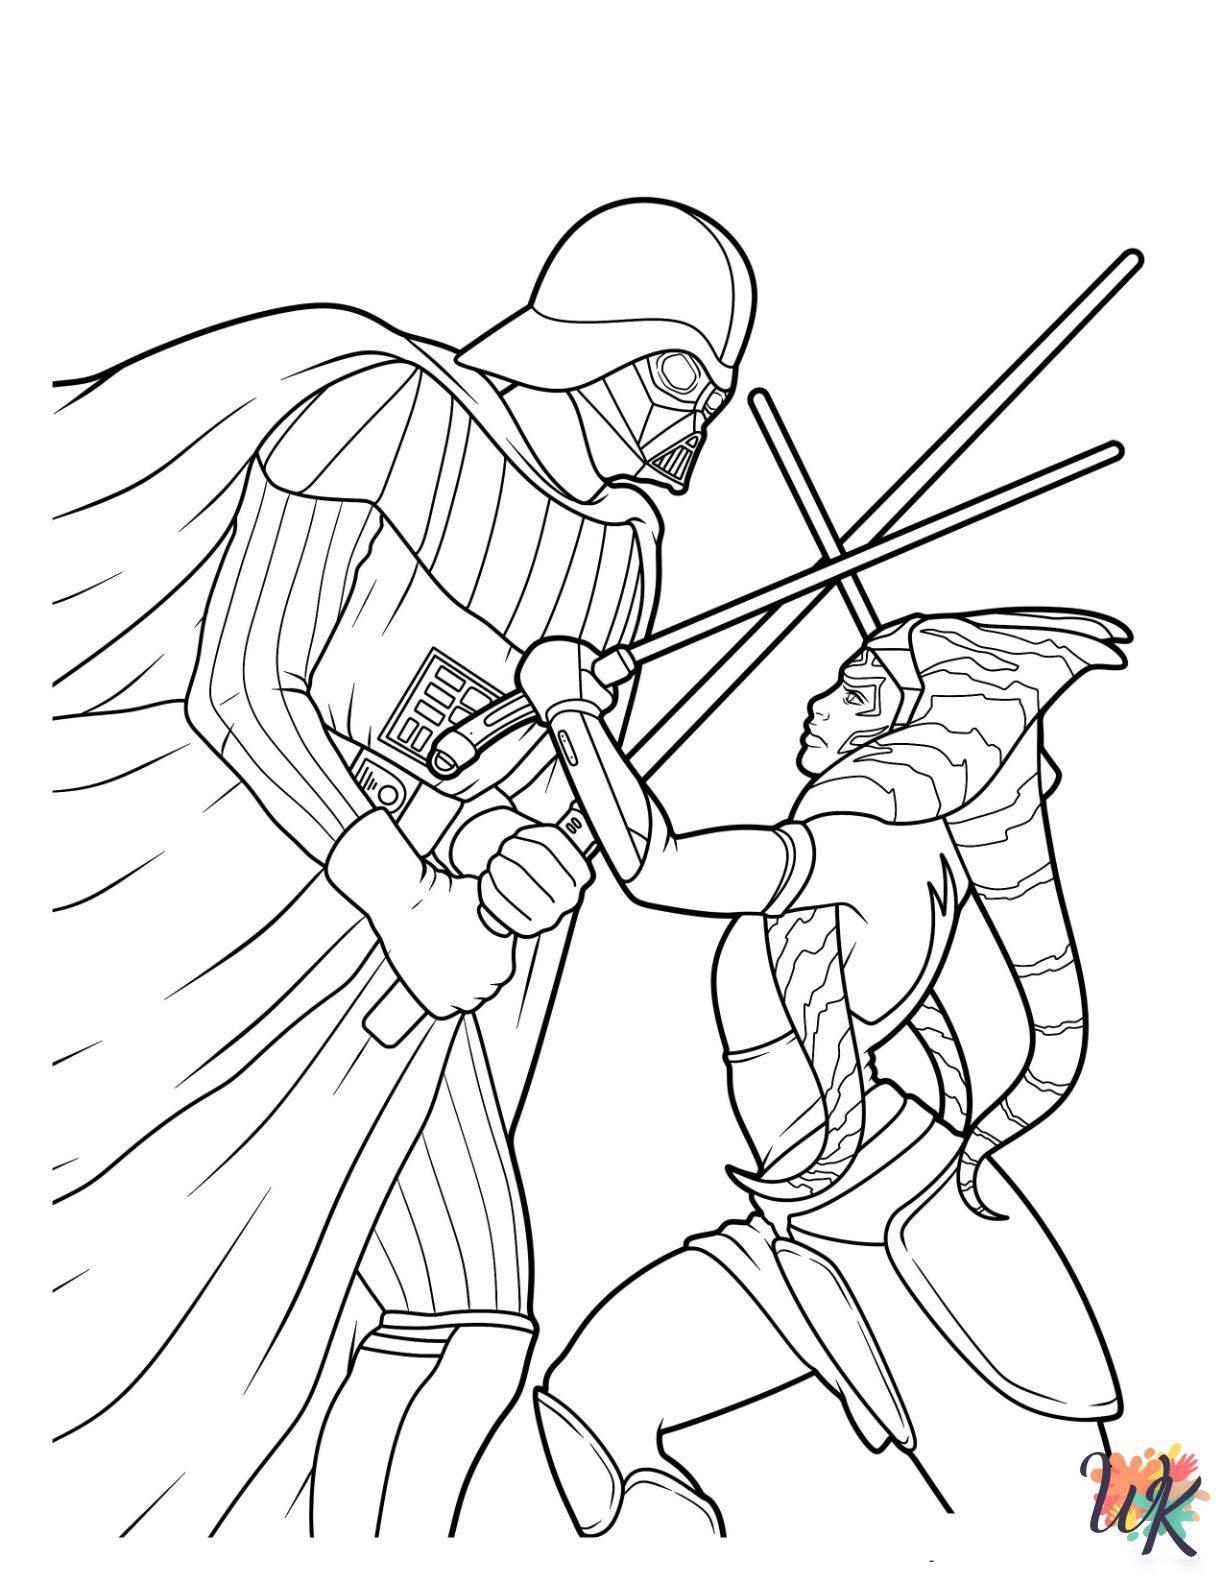 Darth Vader themed coloring pages